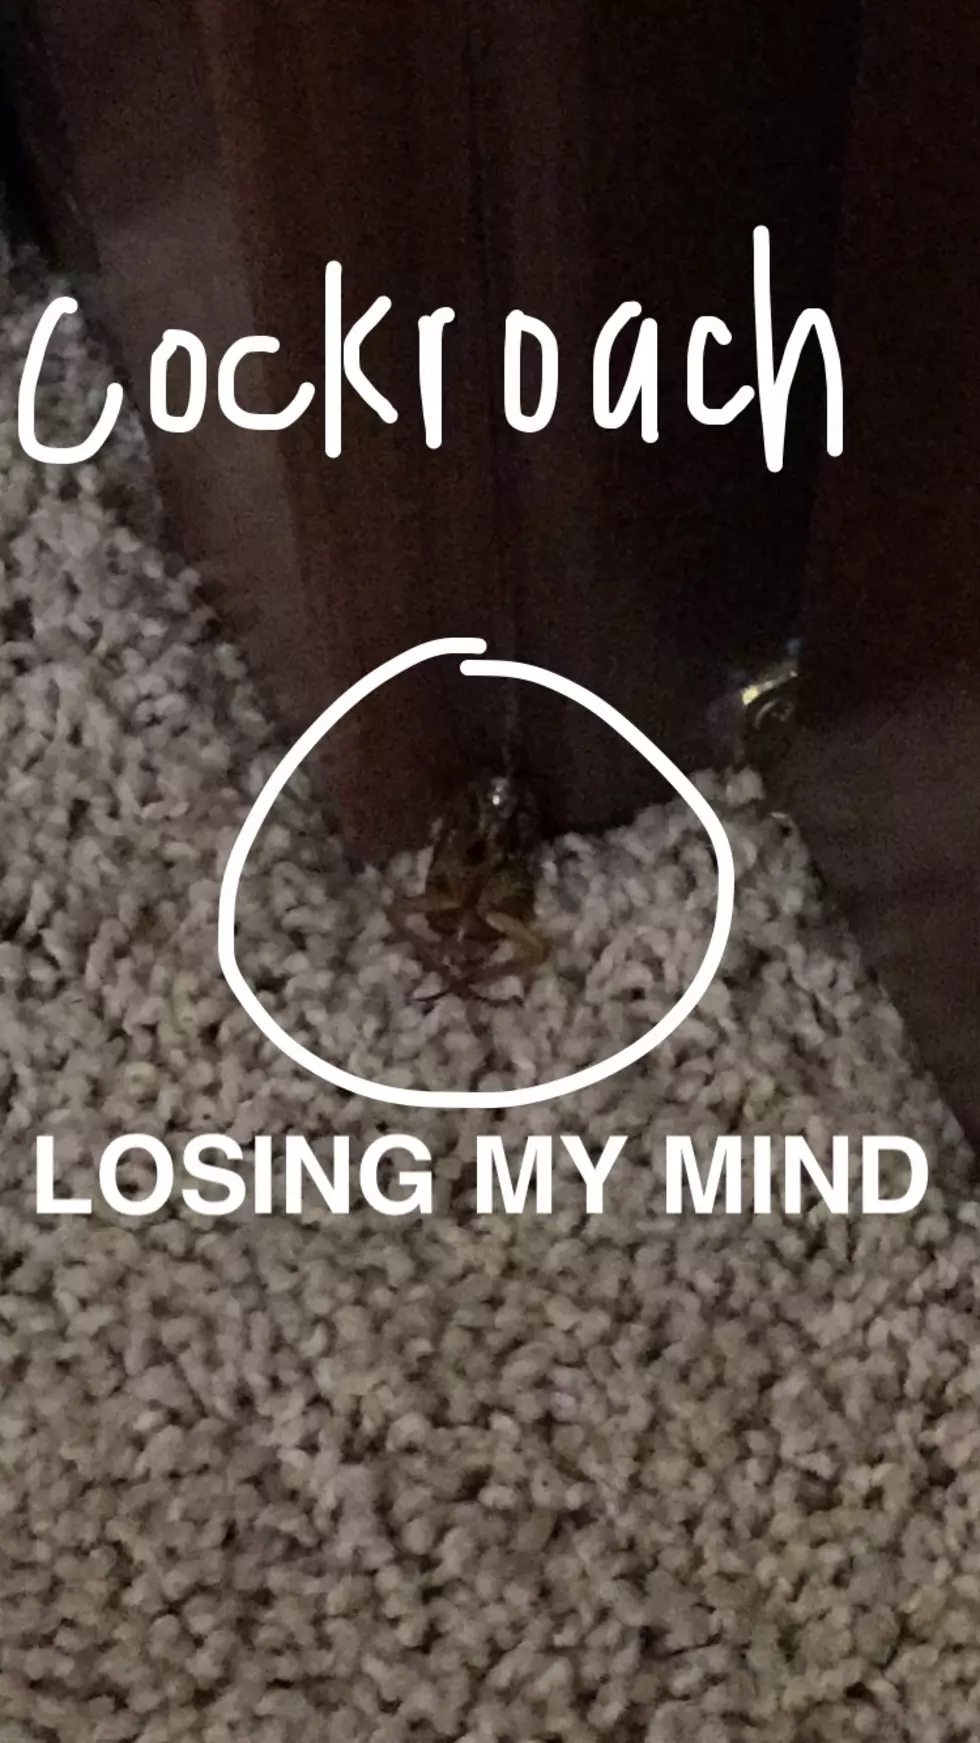 Apartment Infestation: Cockroaches – How do you deal?